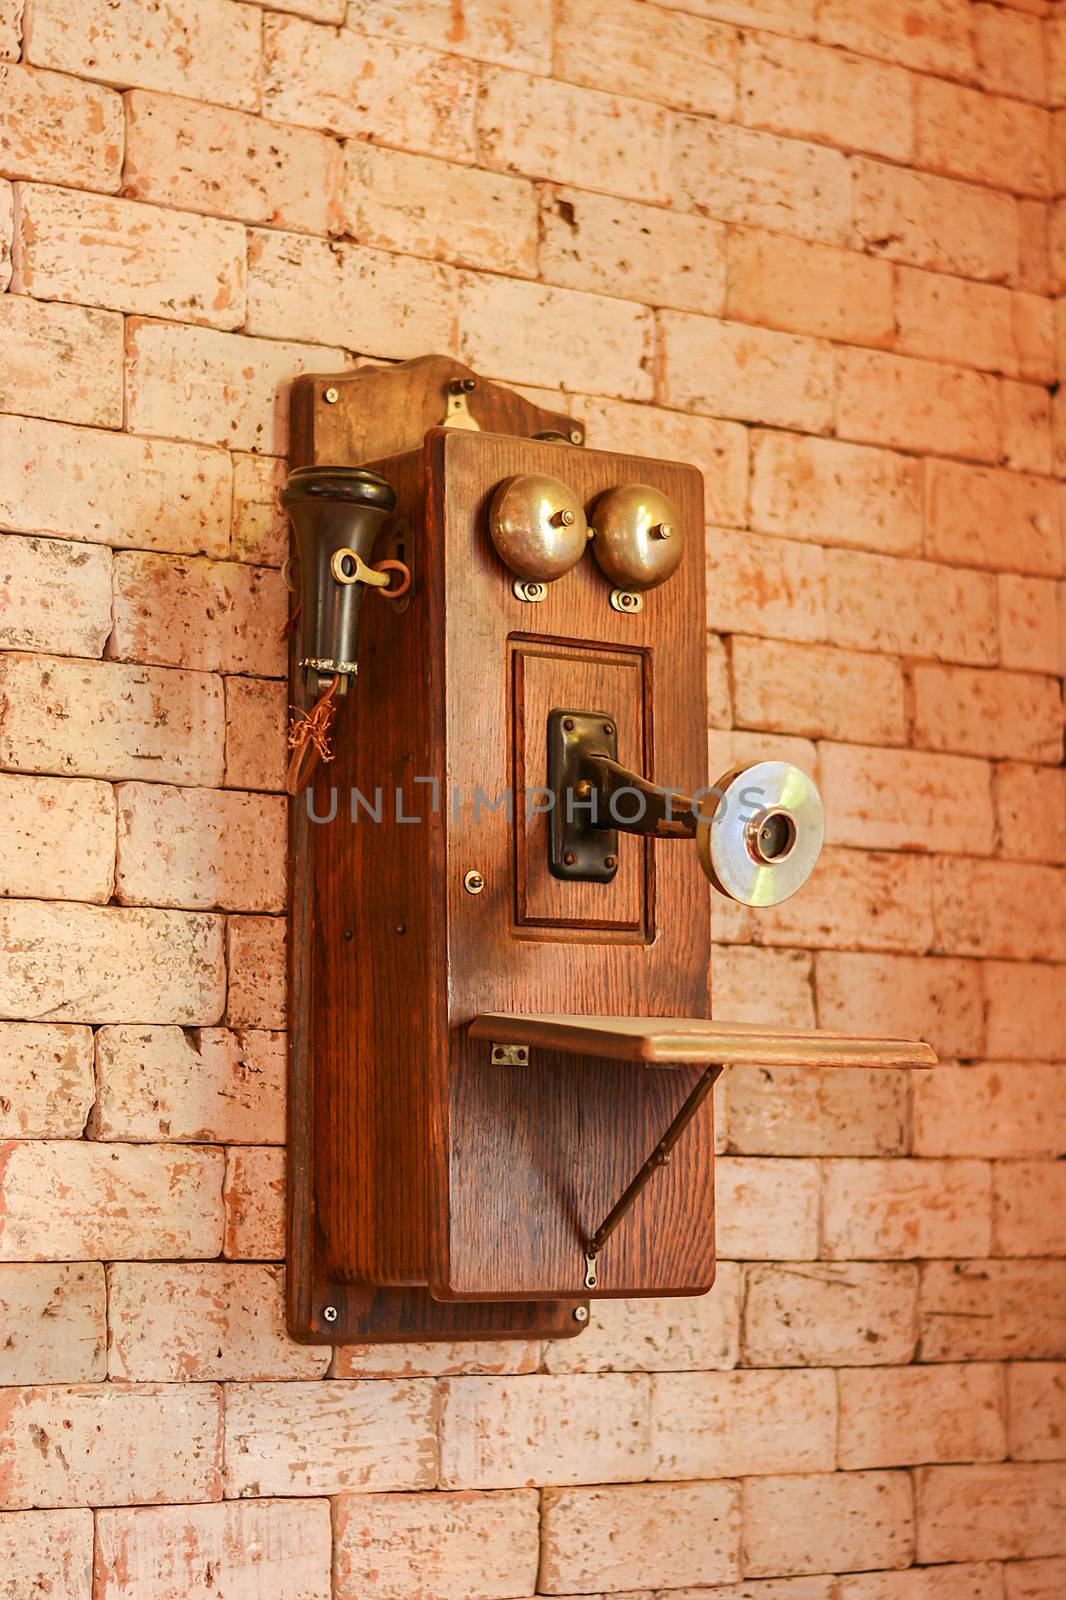 Antique wooden telephone, Vintage Telephone on grungy background of a brick wall, Retro Phone